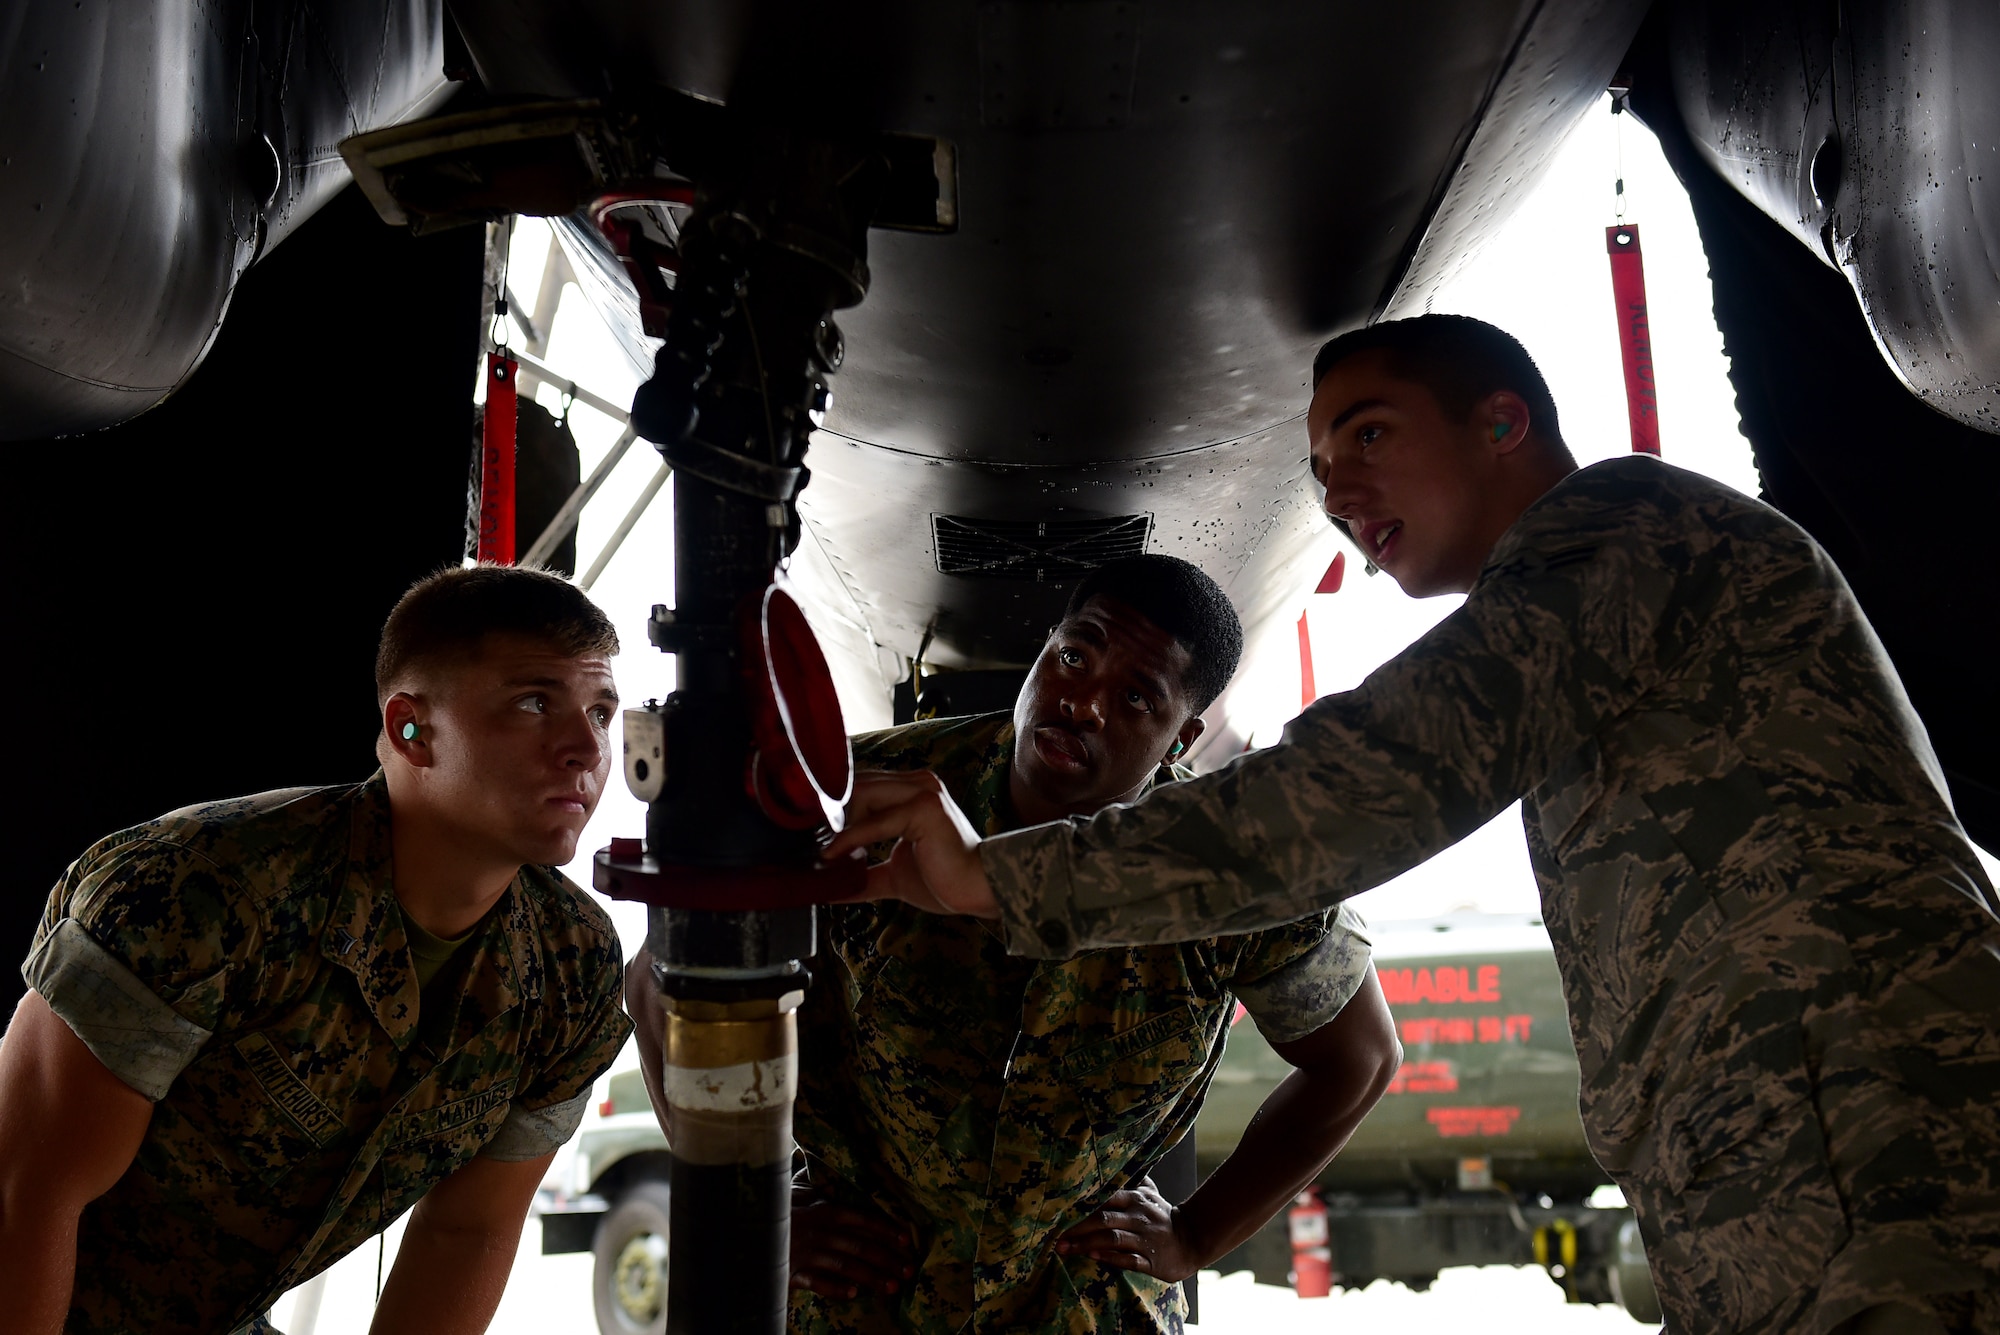 U.S. Marine Corps Lance Cpl. Austin Whitehurst, Marine Wing Support Squadron 271 bulk fuel specialist (left), Staff Sergeant David Alston, MWSS 271 platoon sergeant (middle), and Airman 1st Class Scott Plante Jr., 4th Logistics Readiness Squadron fuels specialist (right), refuel an F-15E Strike Eagle, June 22, 2017, at Seymour Johnson Air Force Base, North Carolina. Airmen trained Marines in a two-day joint training exercise to familiarize the Marines with the R-11 aircraft refueler before their deployment to Morón Air Base, Spain. (U.S. Air Force photo by Airman 1st Class Kenneth Boyton)